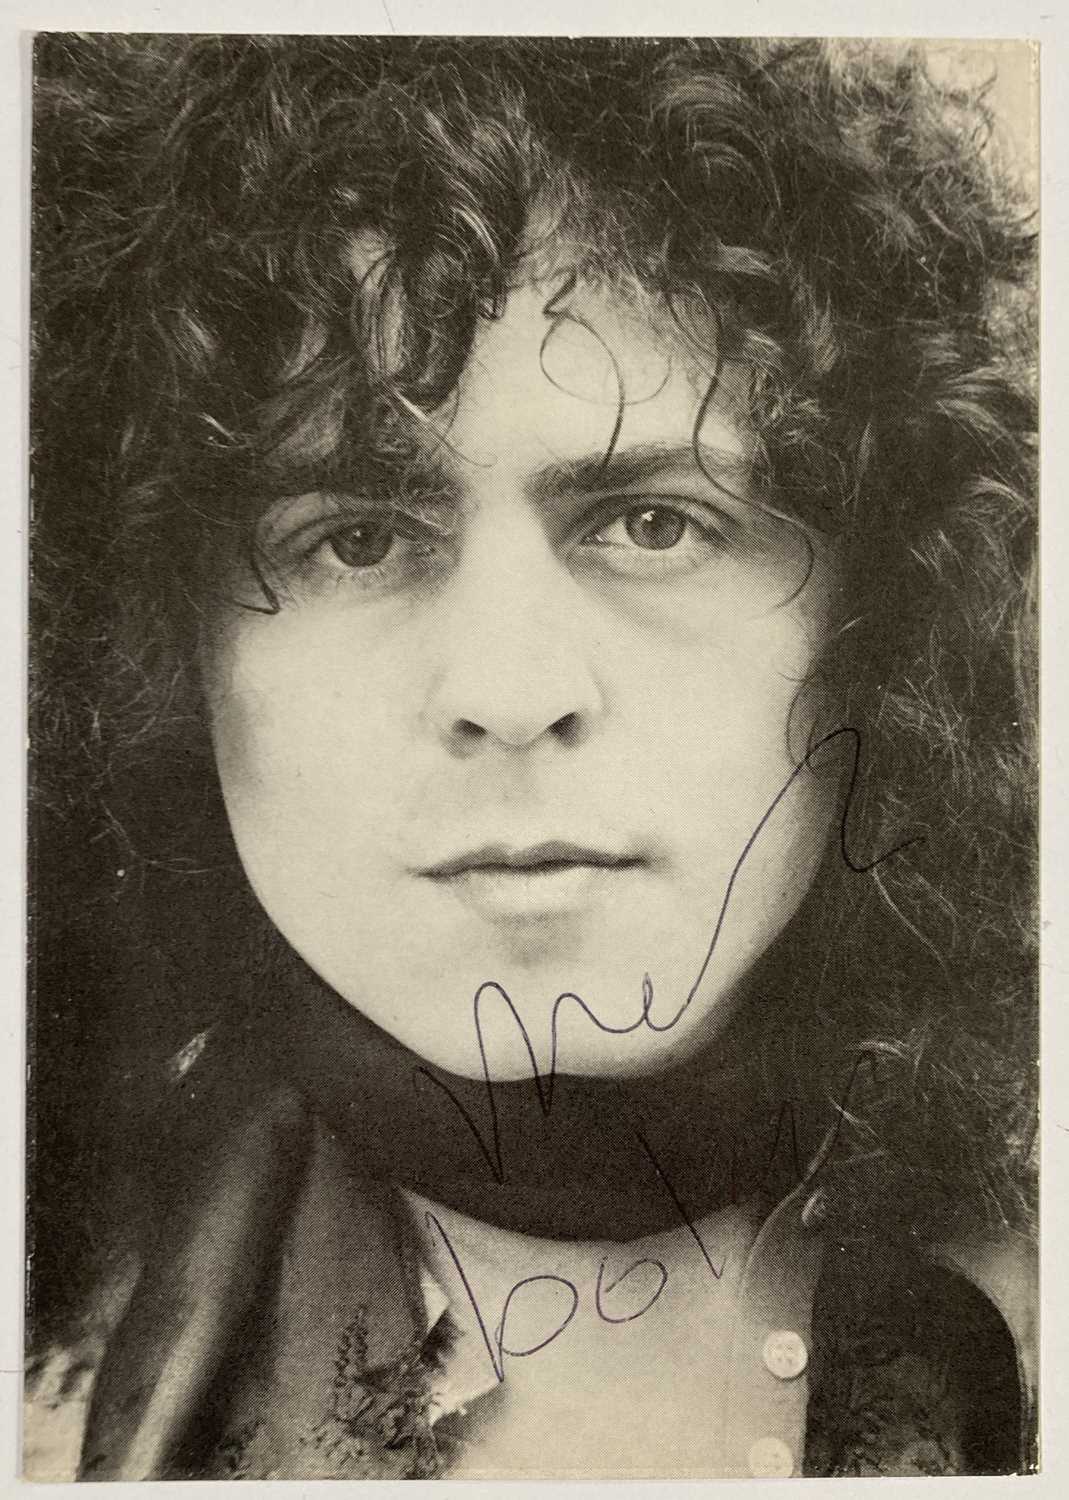 Lot 455 - MARC BOLAN - A SIGNED POSTCARD.